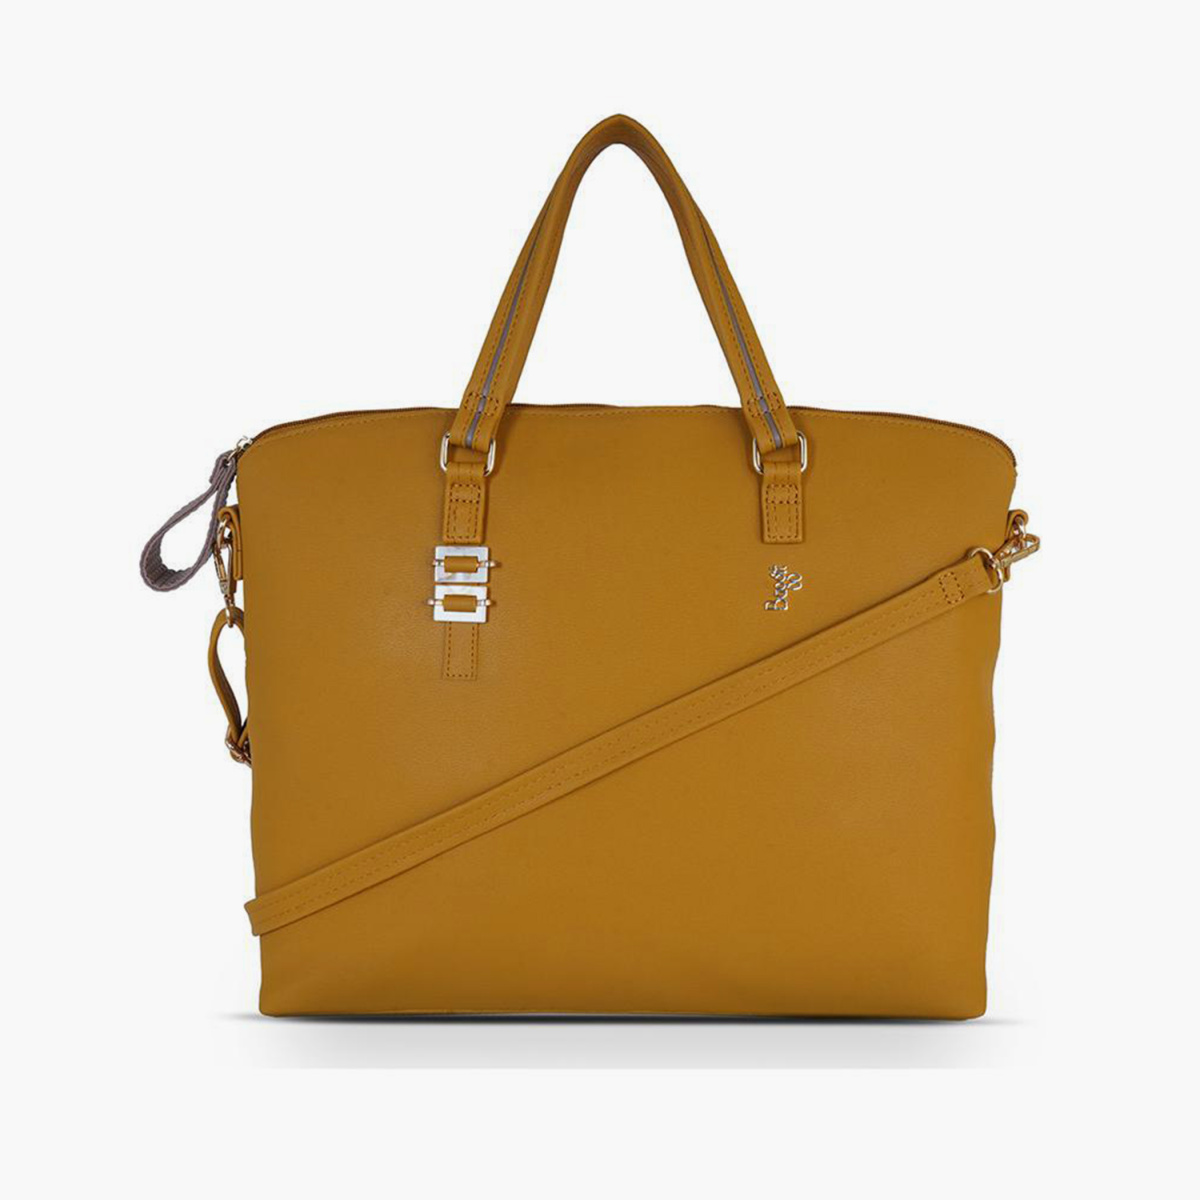 Designer Bamboo1947 Baggit Shoulder Bags For Women High Quality Crossbody  Handbag With Top Handle And Messenger Style From Setsailbag, $50.74 |  DHgate.Com